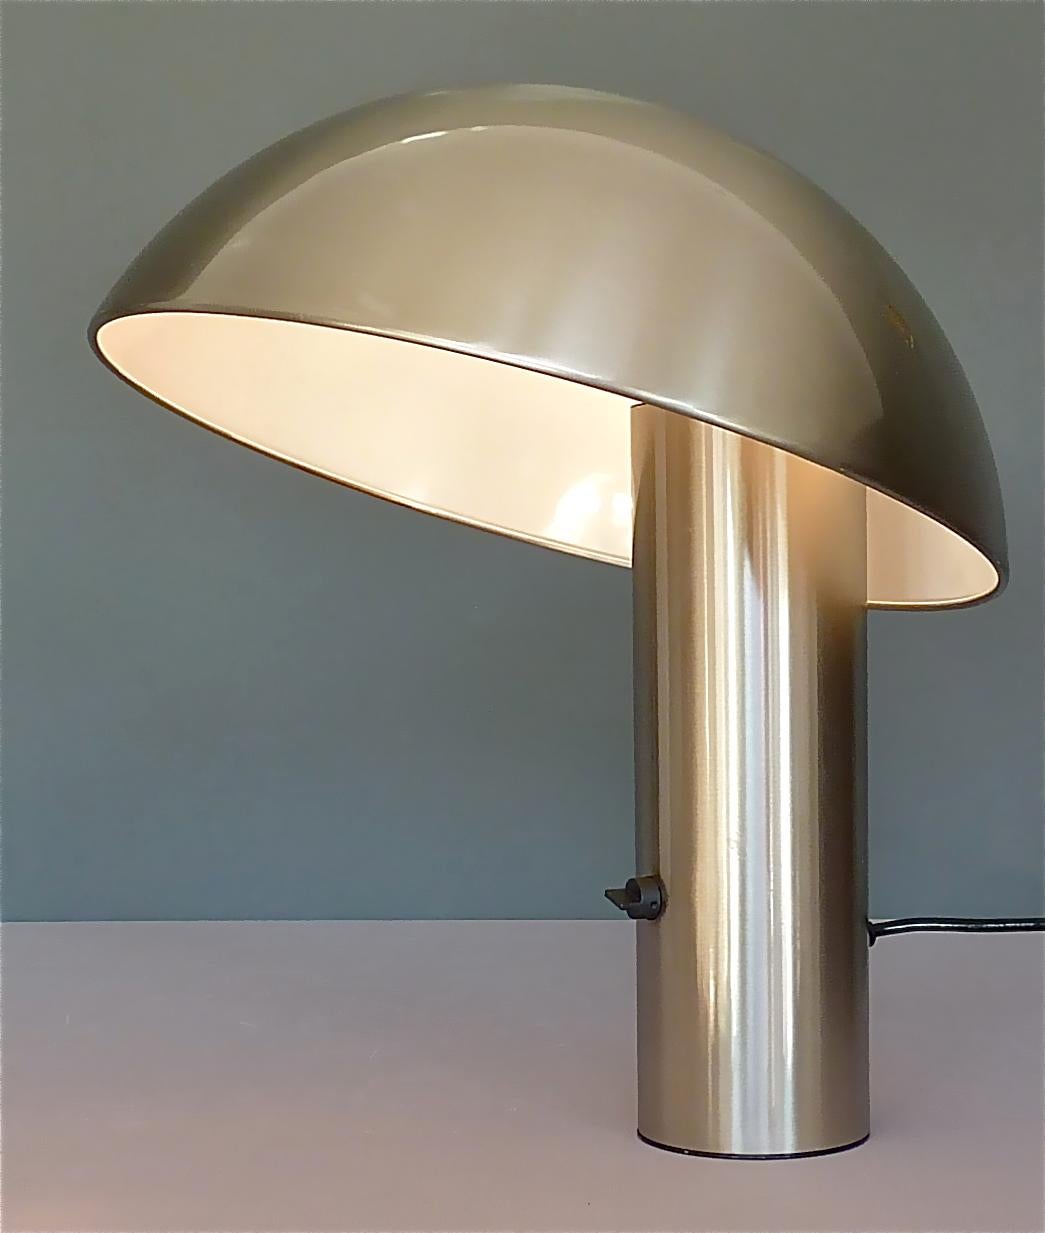 Cool Space Age Vaga table lamp designed by Franco Mirenzi in 1978 and executed by Valenti Luce Milano, Italy in the 1970s-1980s. Signed with company label inside the Vaga table lamp is described in the 